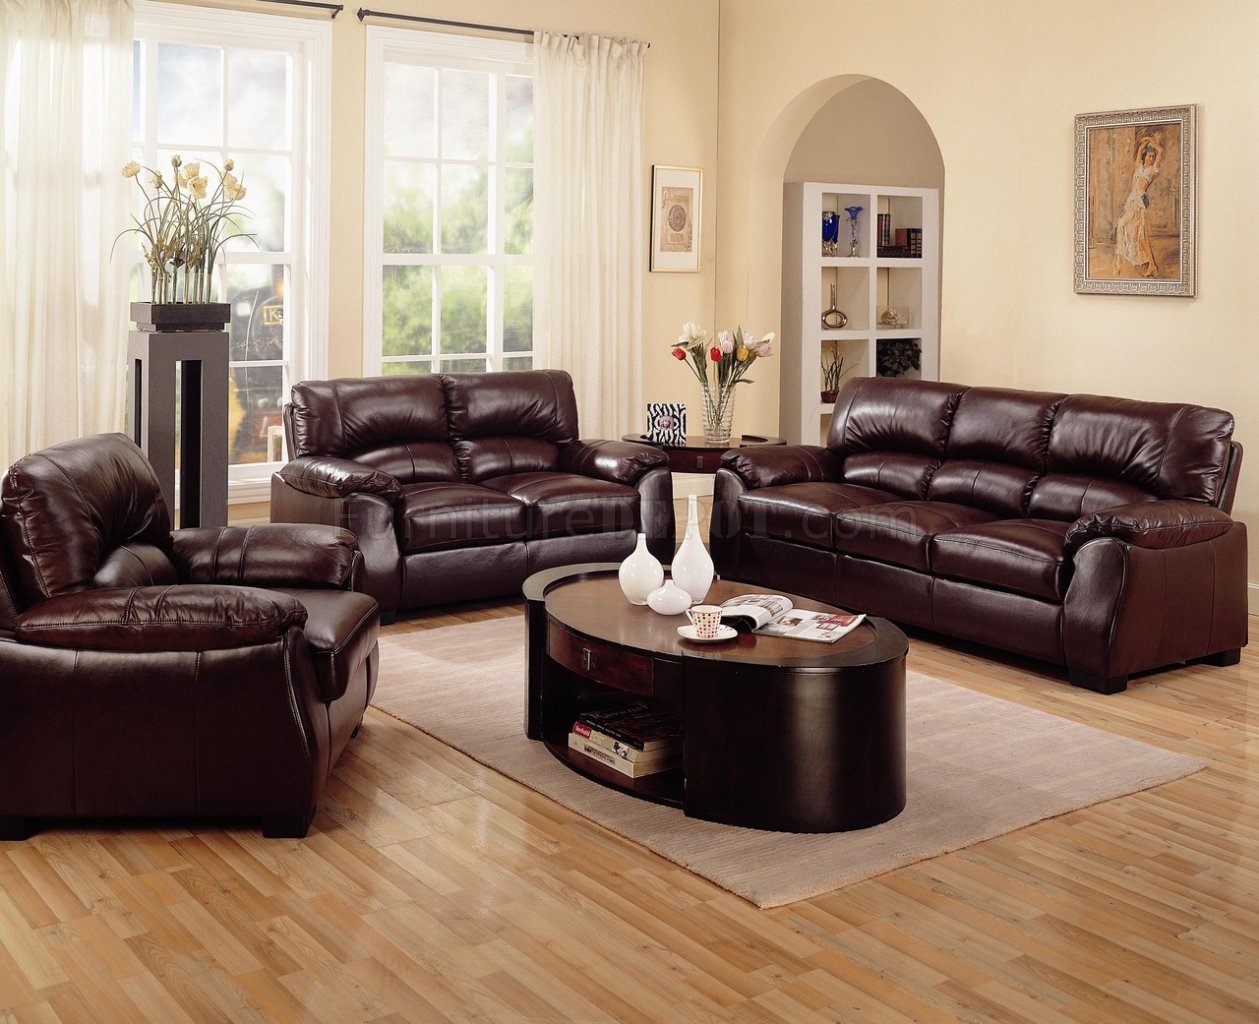 Rich Brown Leather Match Contemporary Living Room Sofa w ...